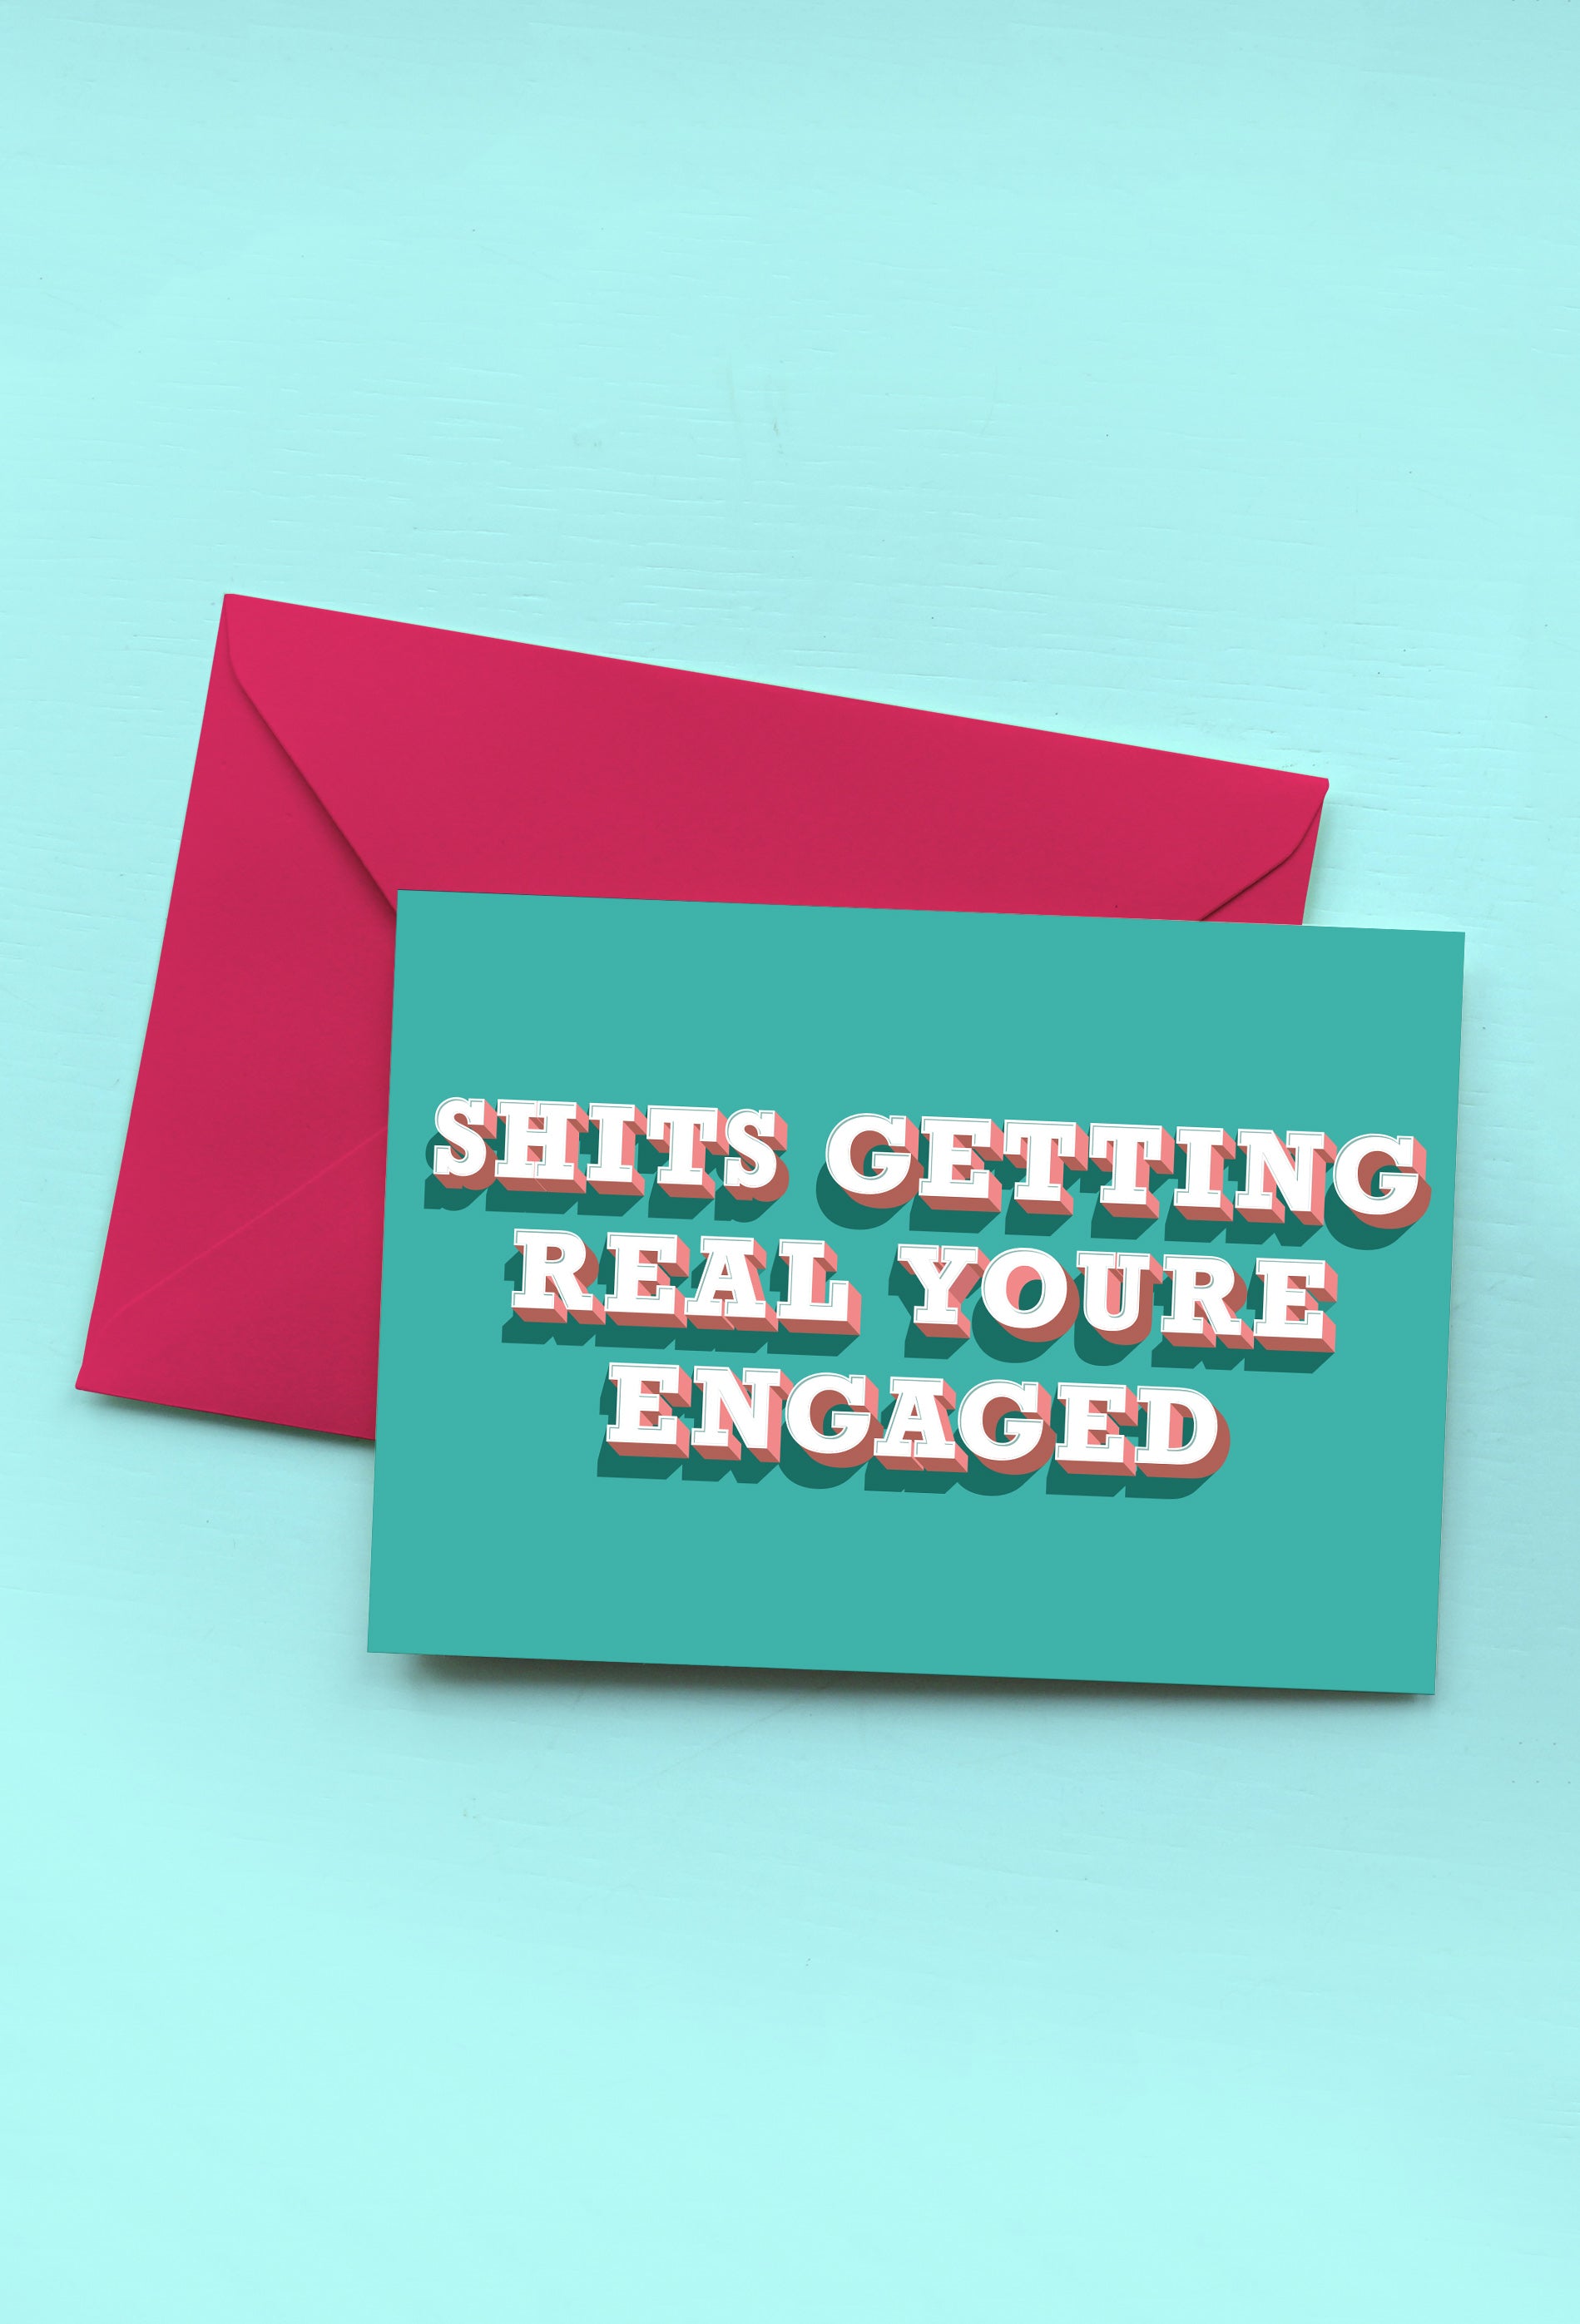 SHITS GETTING REAL YOU'RE ENGAGED - GREETINGS CARD